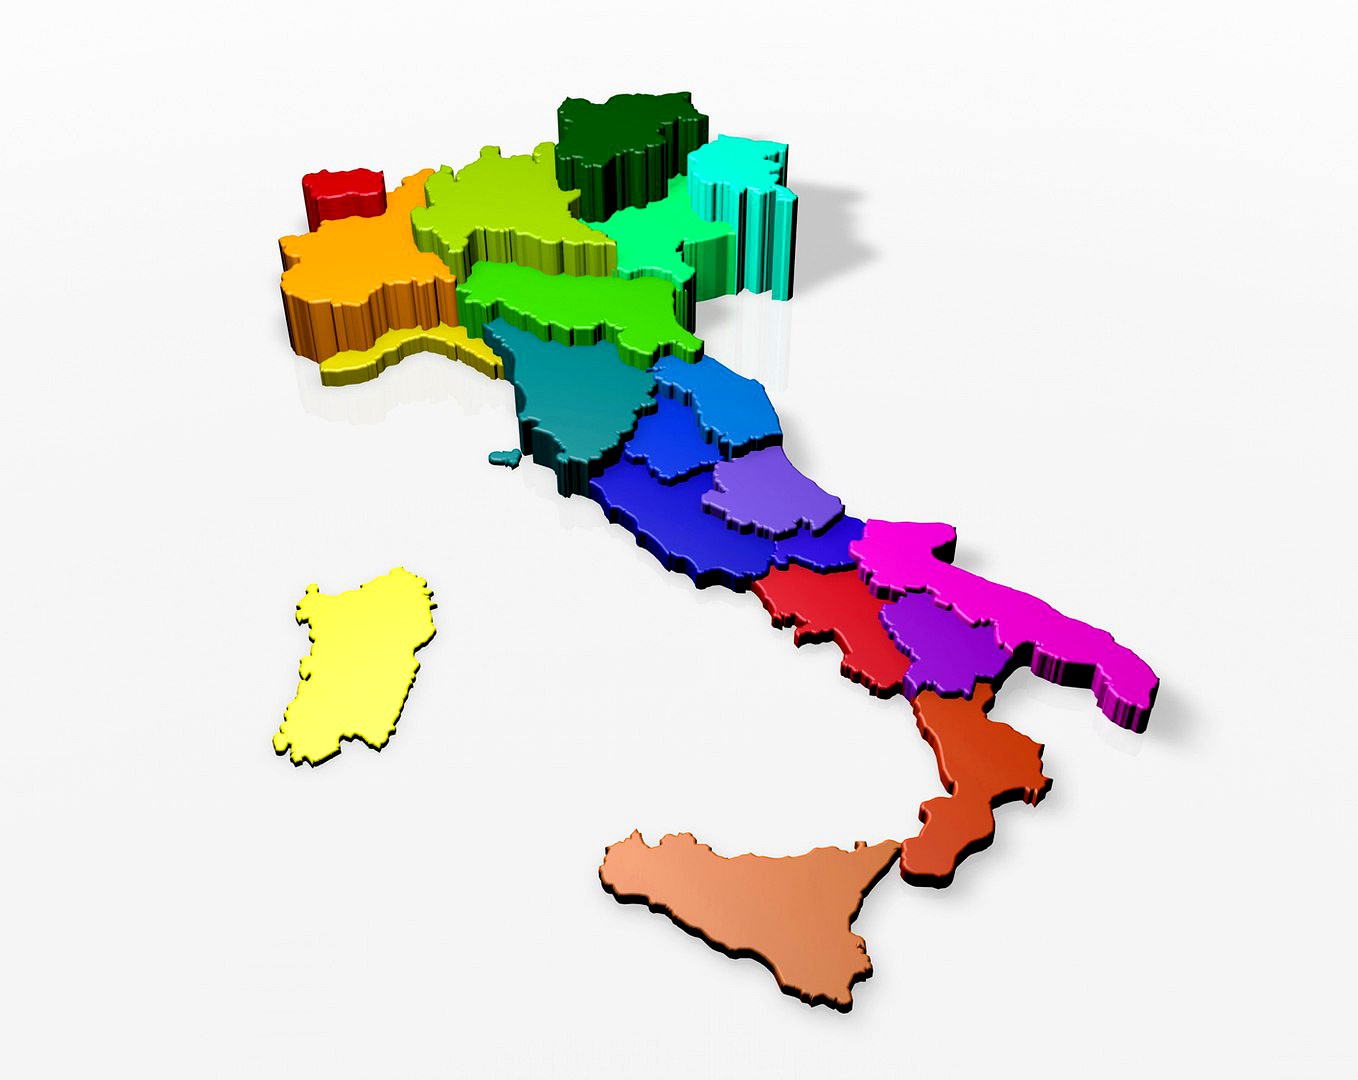 Italy with regions